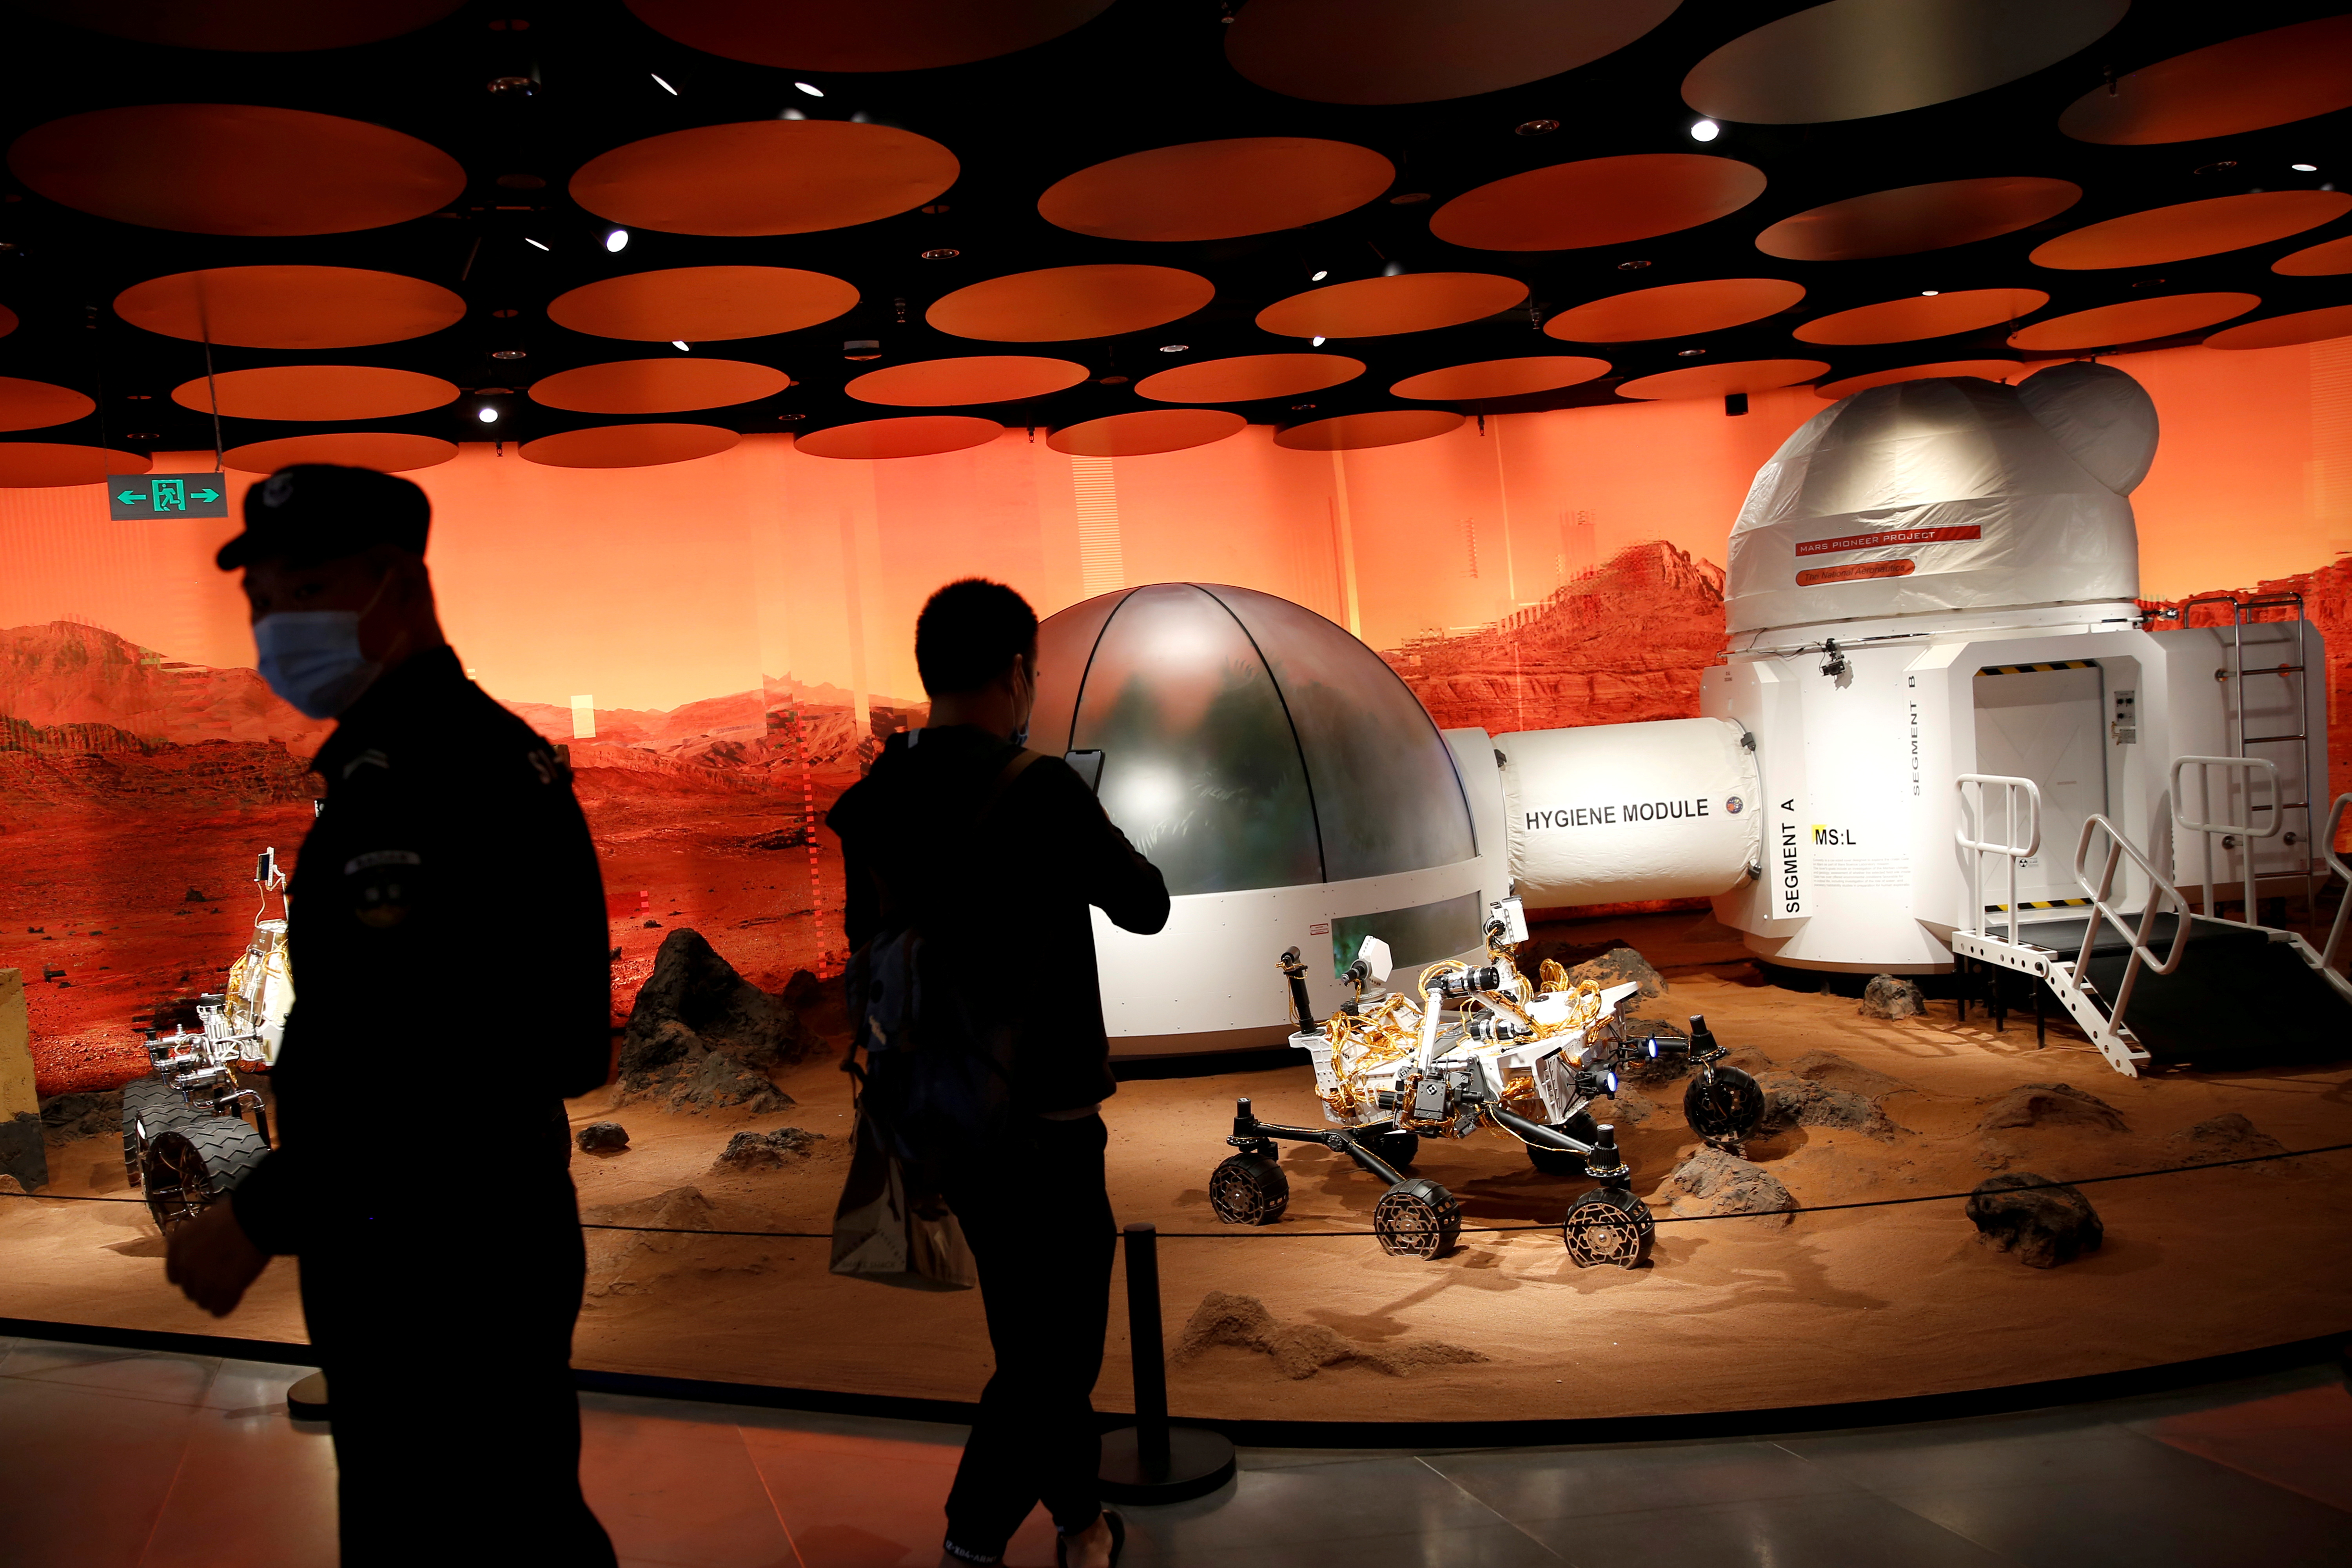 People wearing face masks following the COVID-19 outbreak are seen near models of a Mars base and a rover displayed inside the SKP-S shopping mall in Beijing